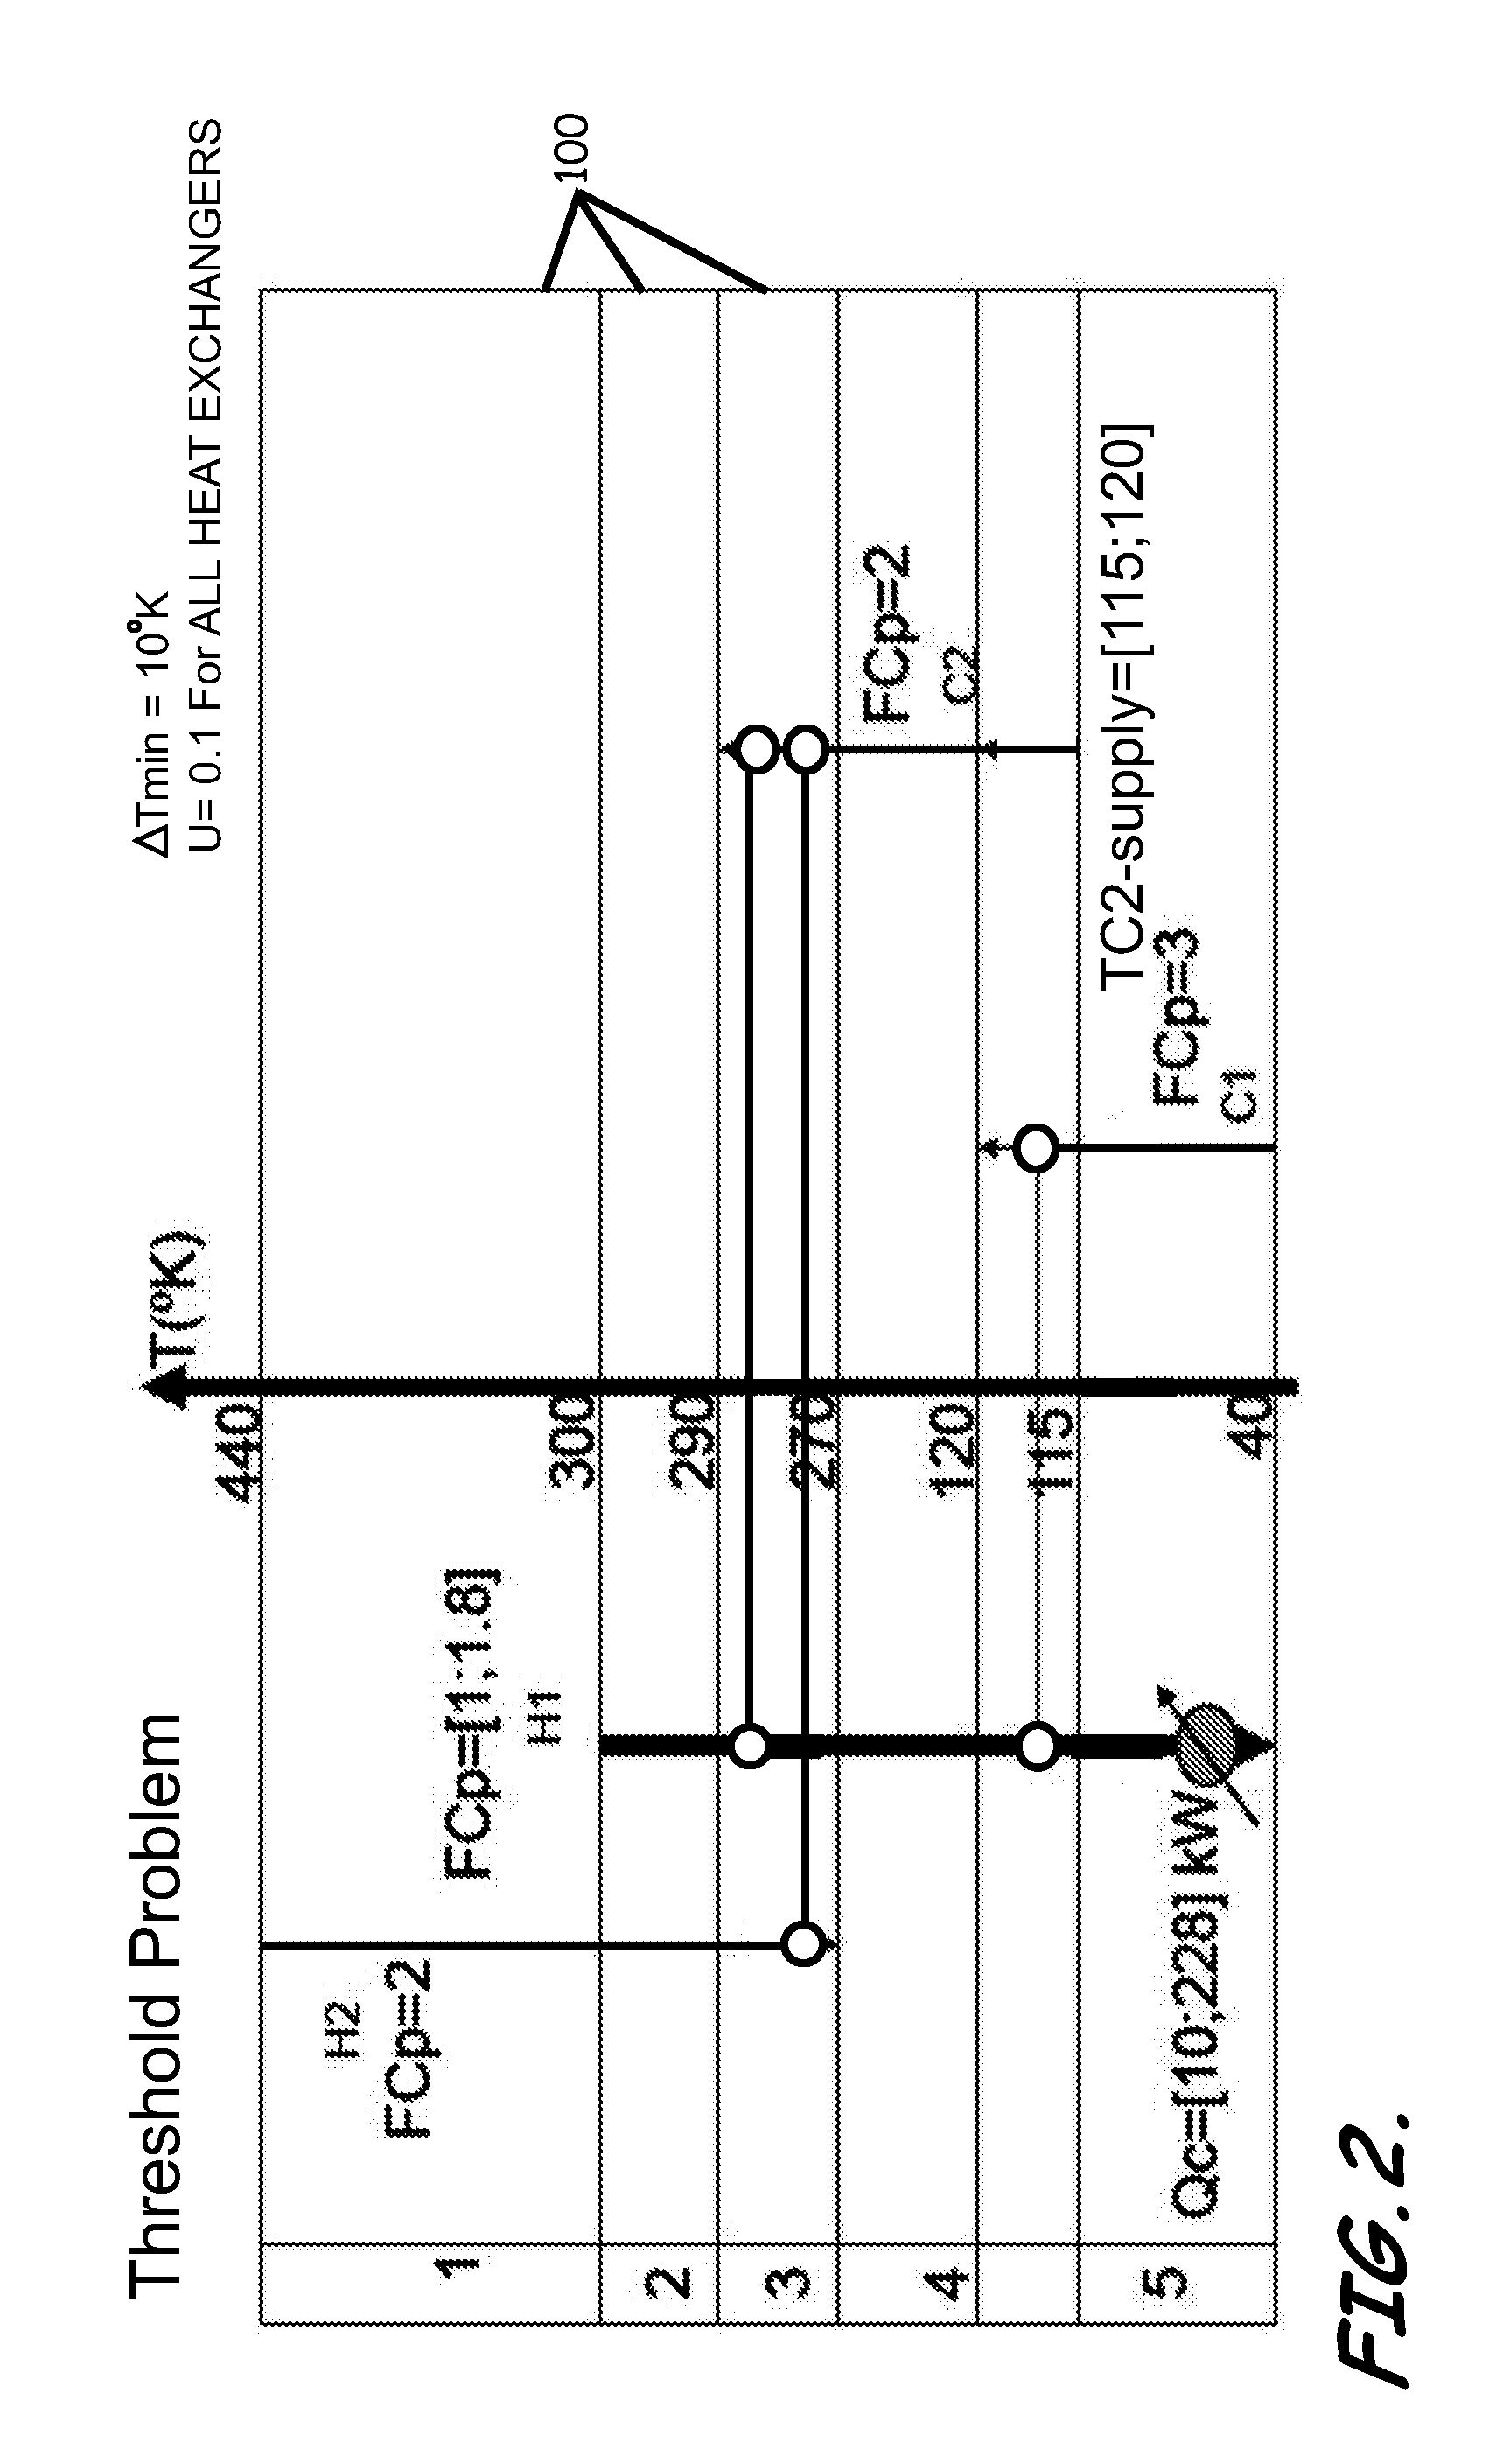 Systems, Program Product, and Methods For Targeting Optimal Process Conditions That Render An Optimal Heat Exchanger Network Design Under Varying Conditions